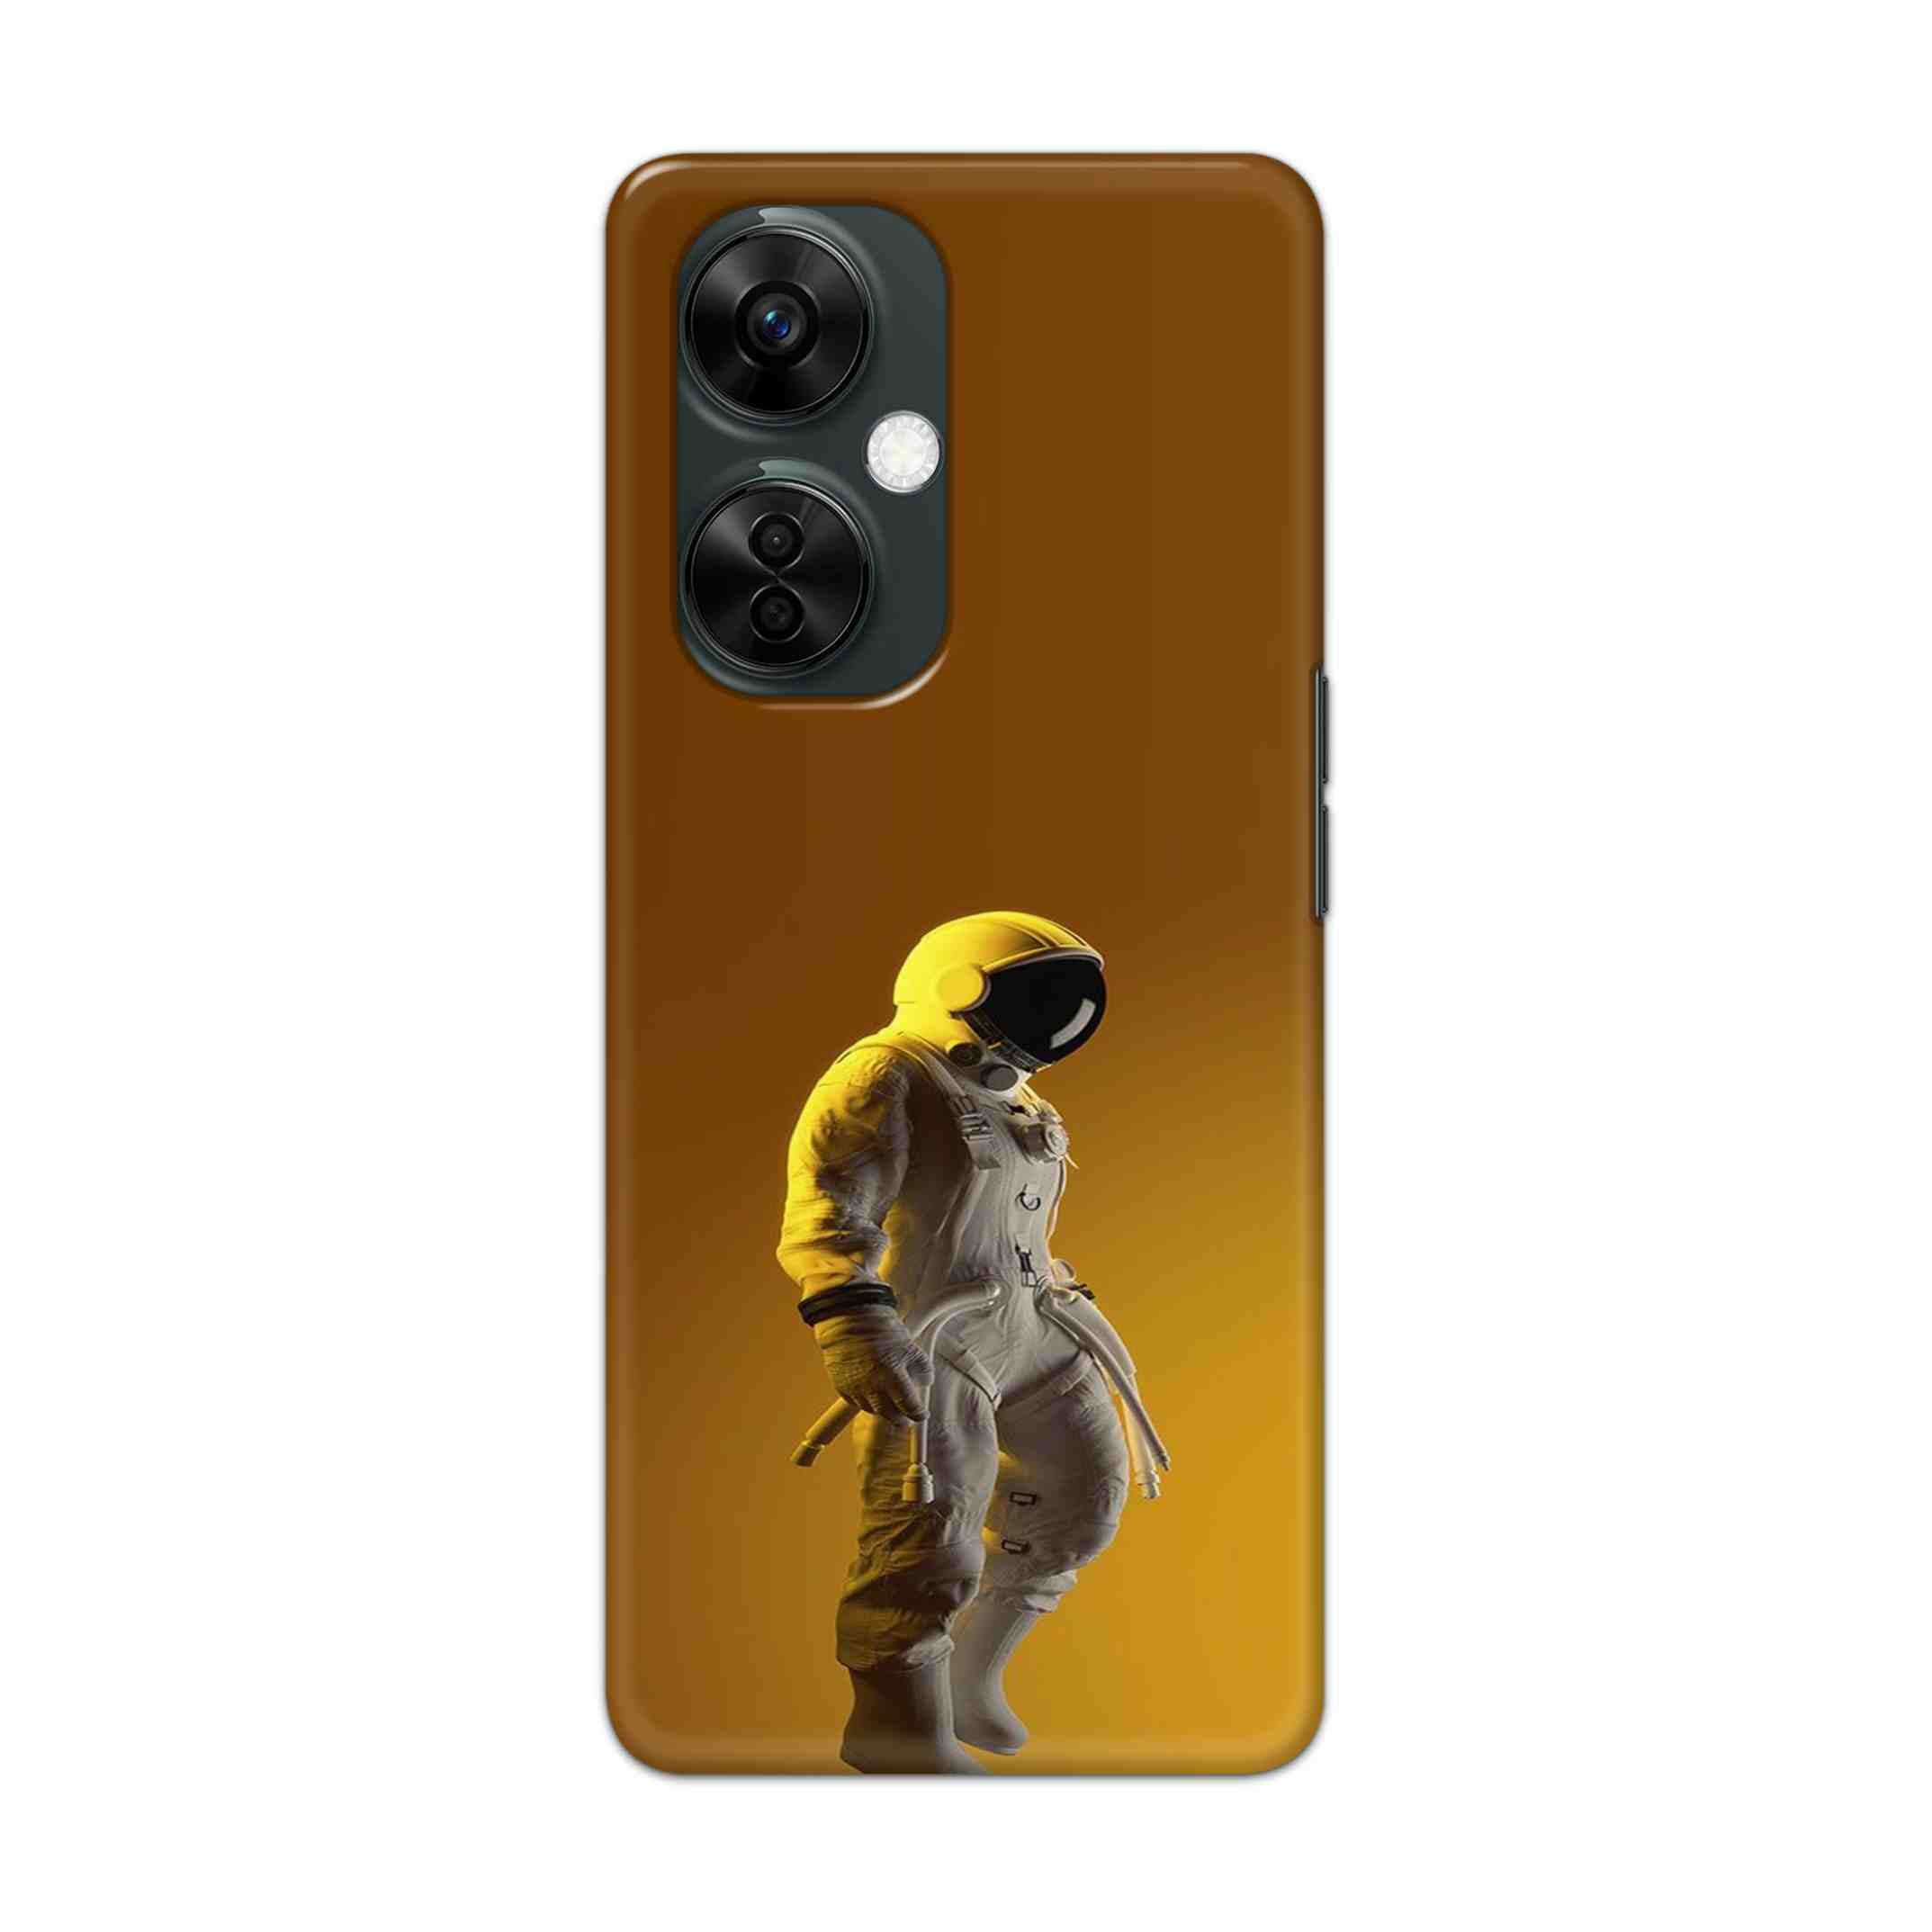 Buy Yellow Astronaut Hard Back Mobile Phone Case Cover For Oneplus Nord CE 3 Lite Online